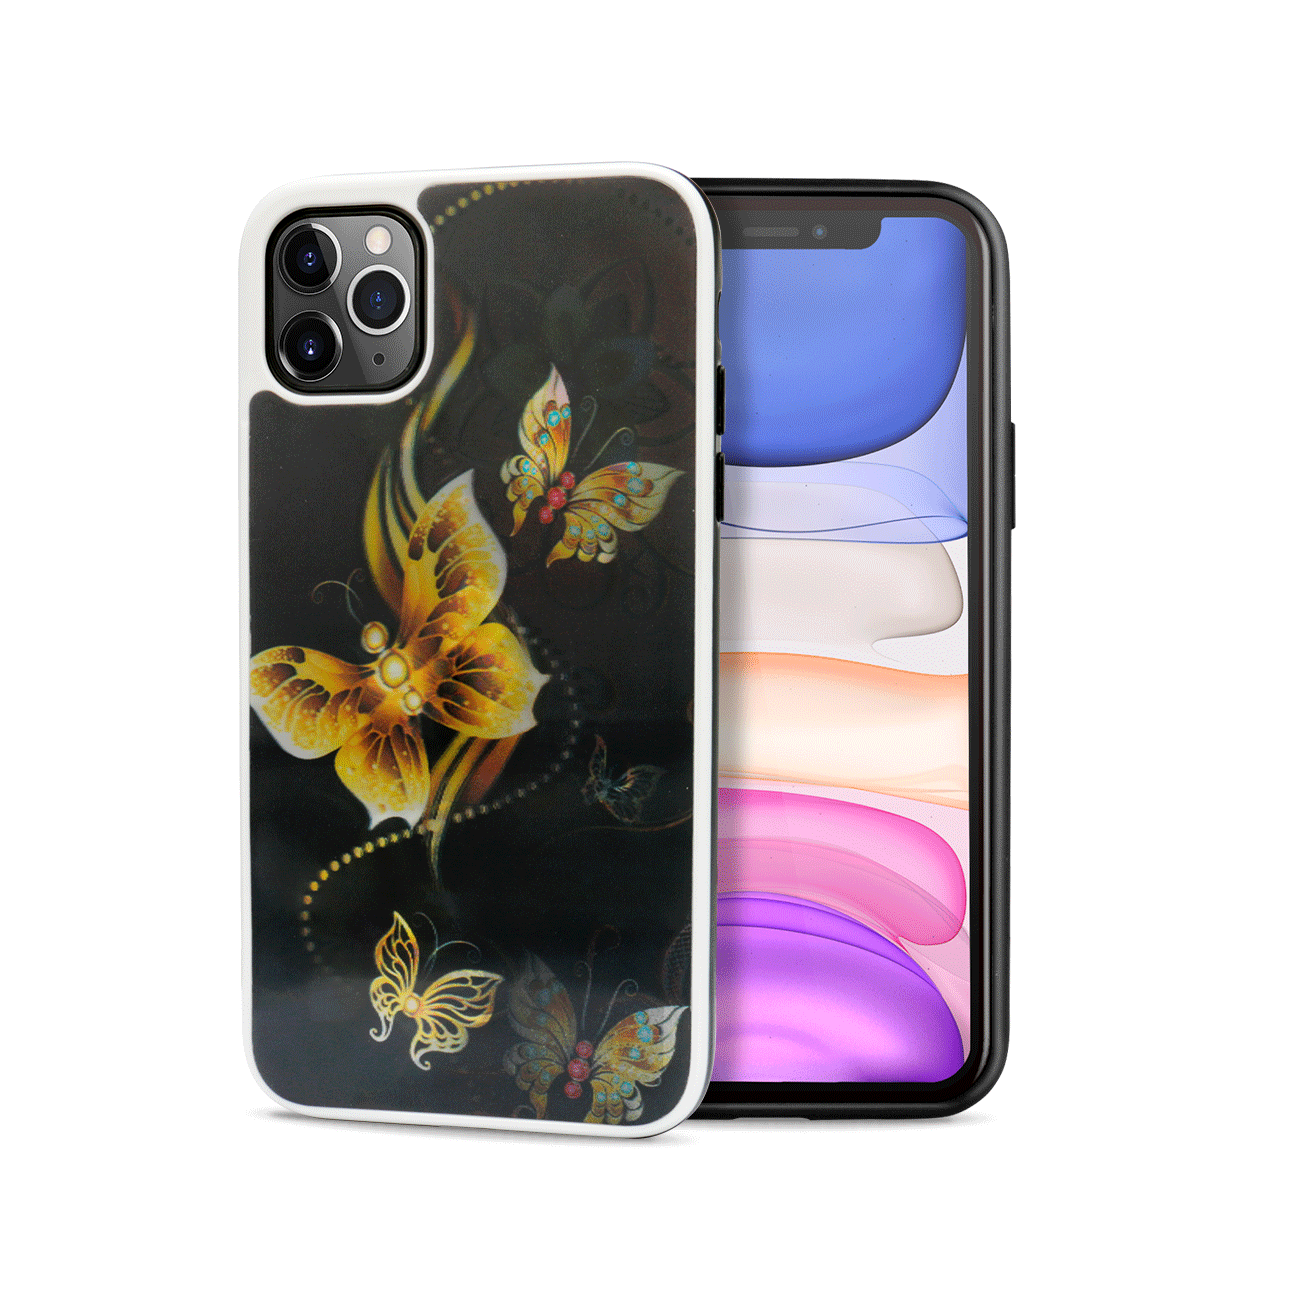 iPHONE 11 Pro Max (6.5in) 3D Dynamic Change Lenticular Design Case (Butterfly)